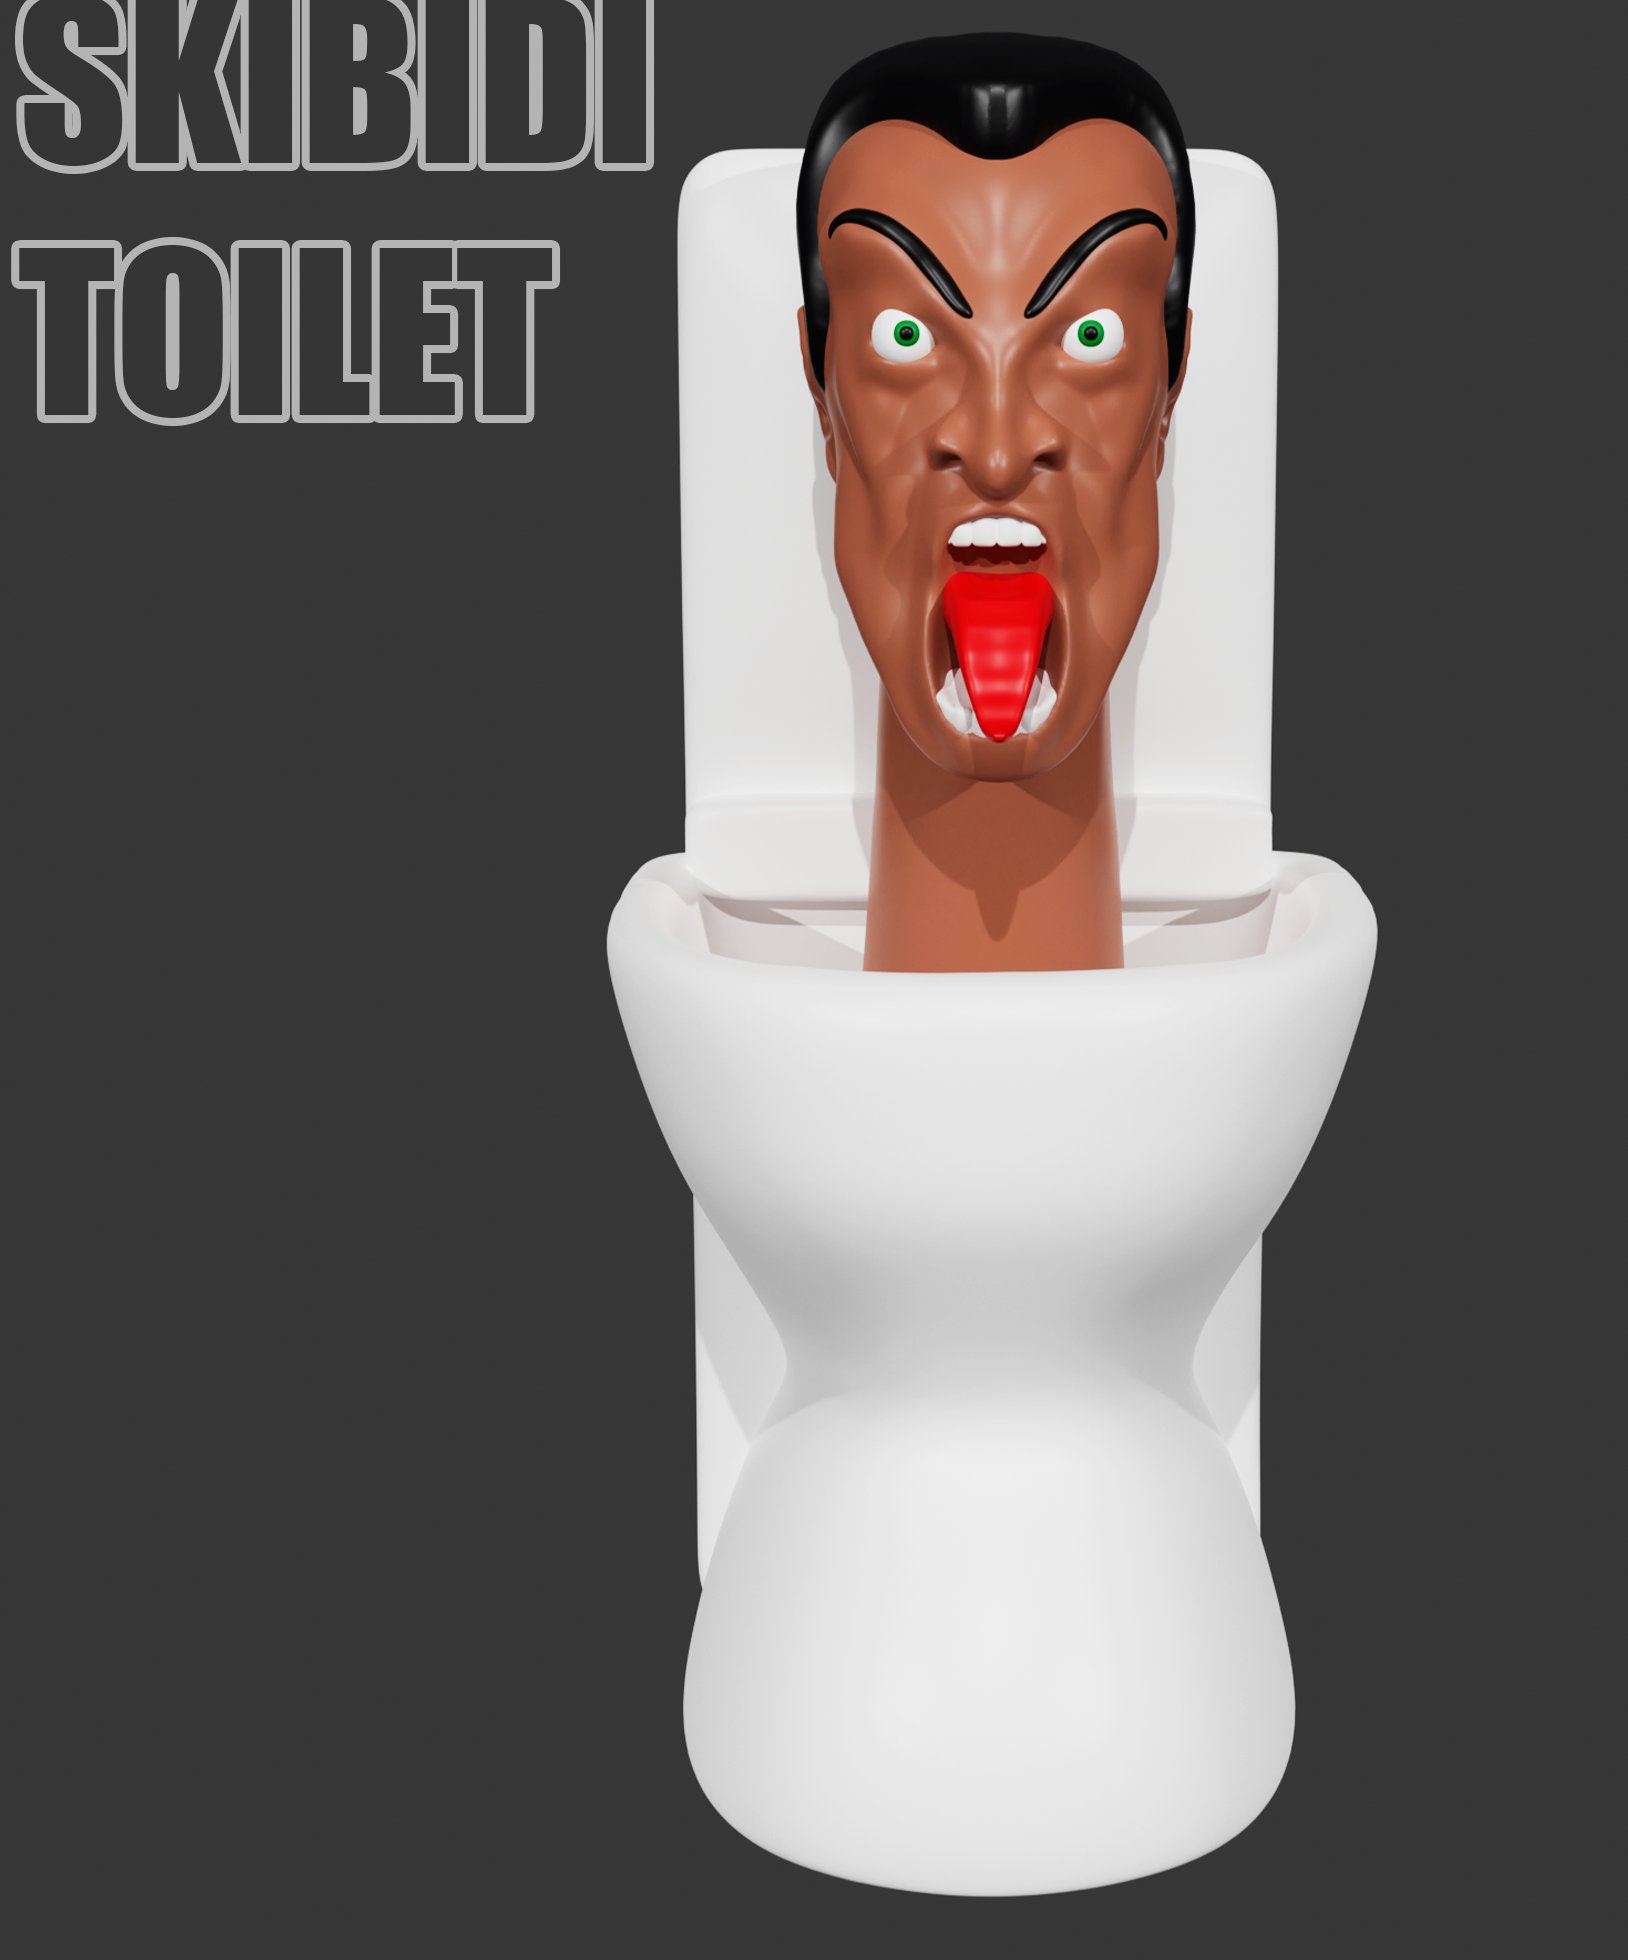 Compare prices for Funny Skibidi Toilet meme game across all